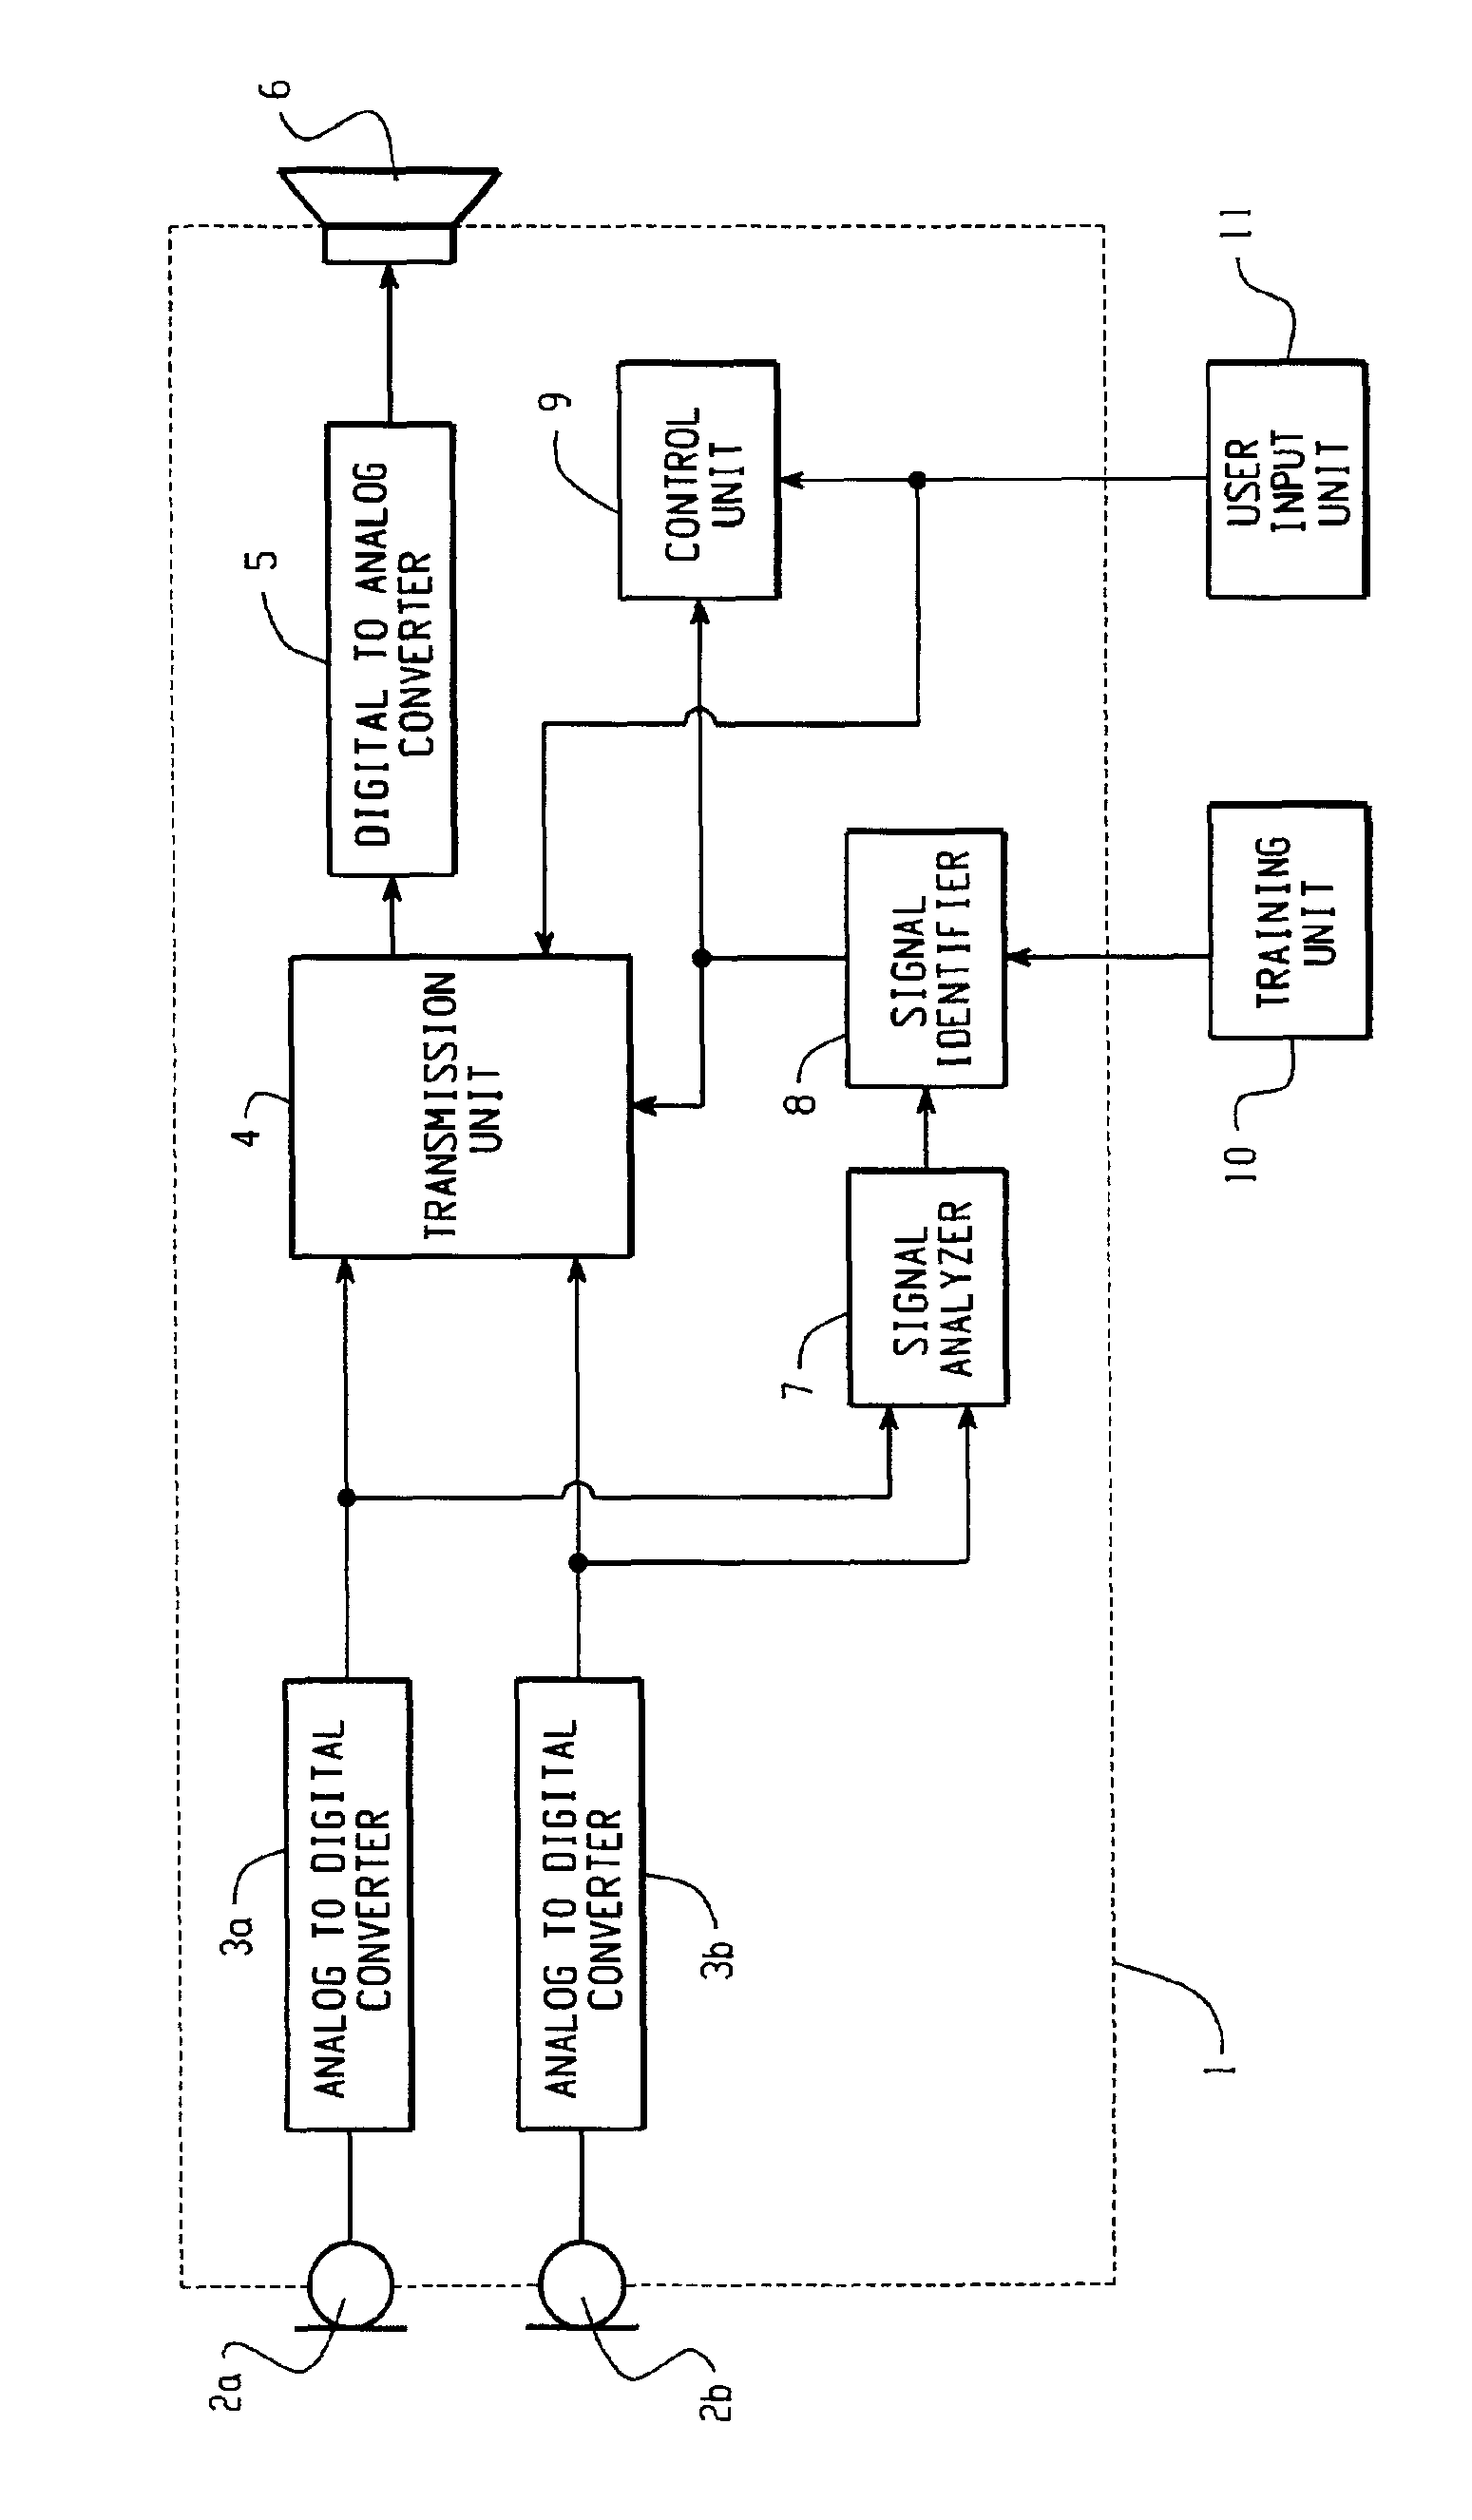 Method for identifying a momentary acoustic scene, application of said method, and a hearing device